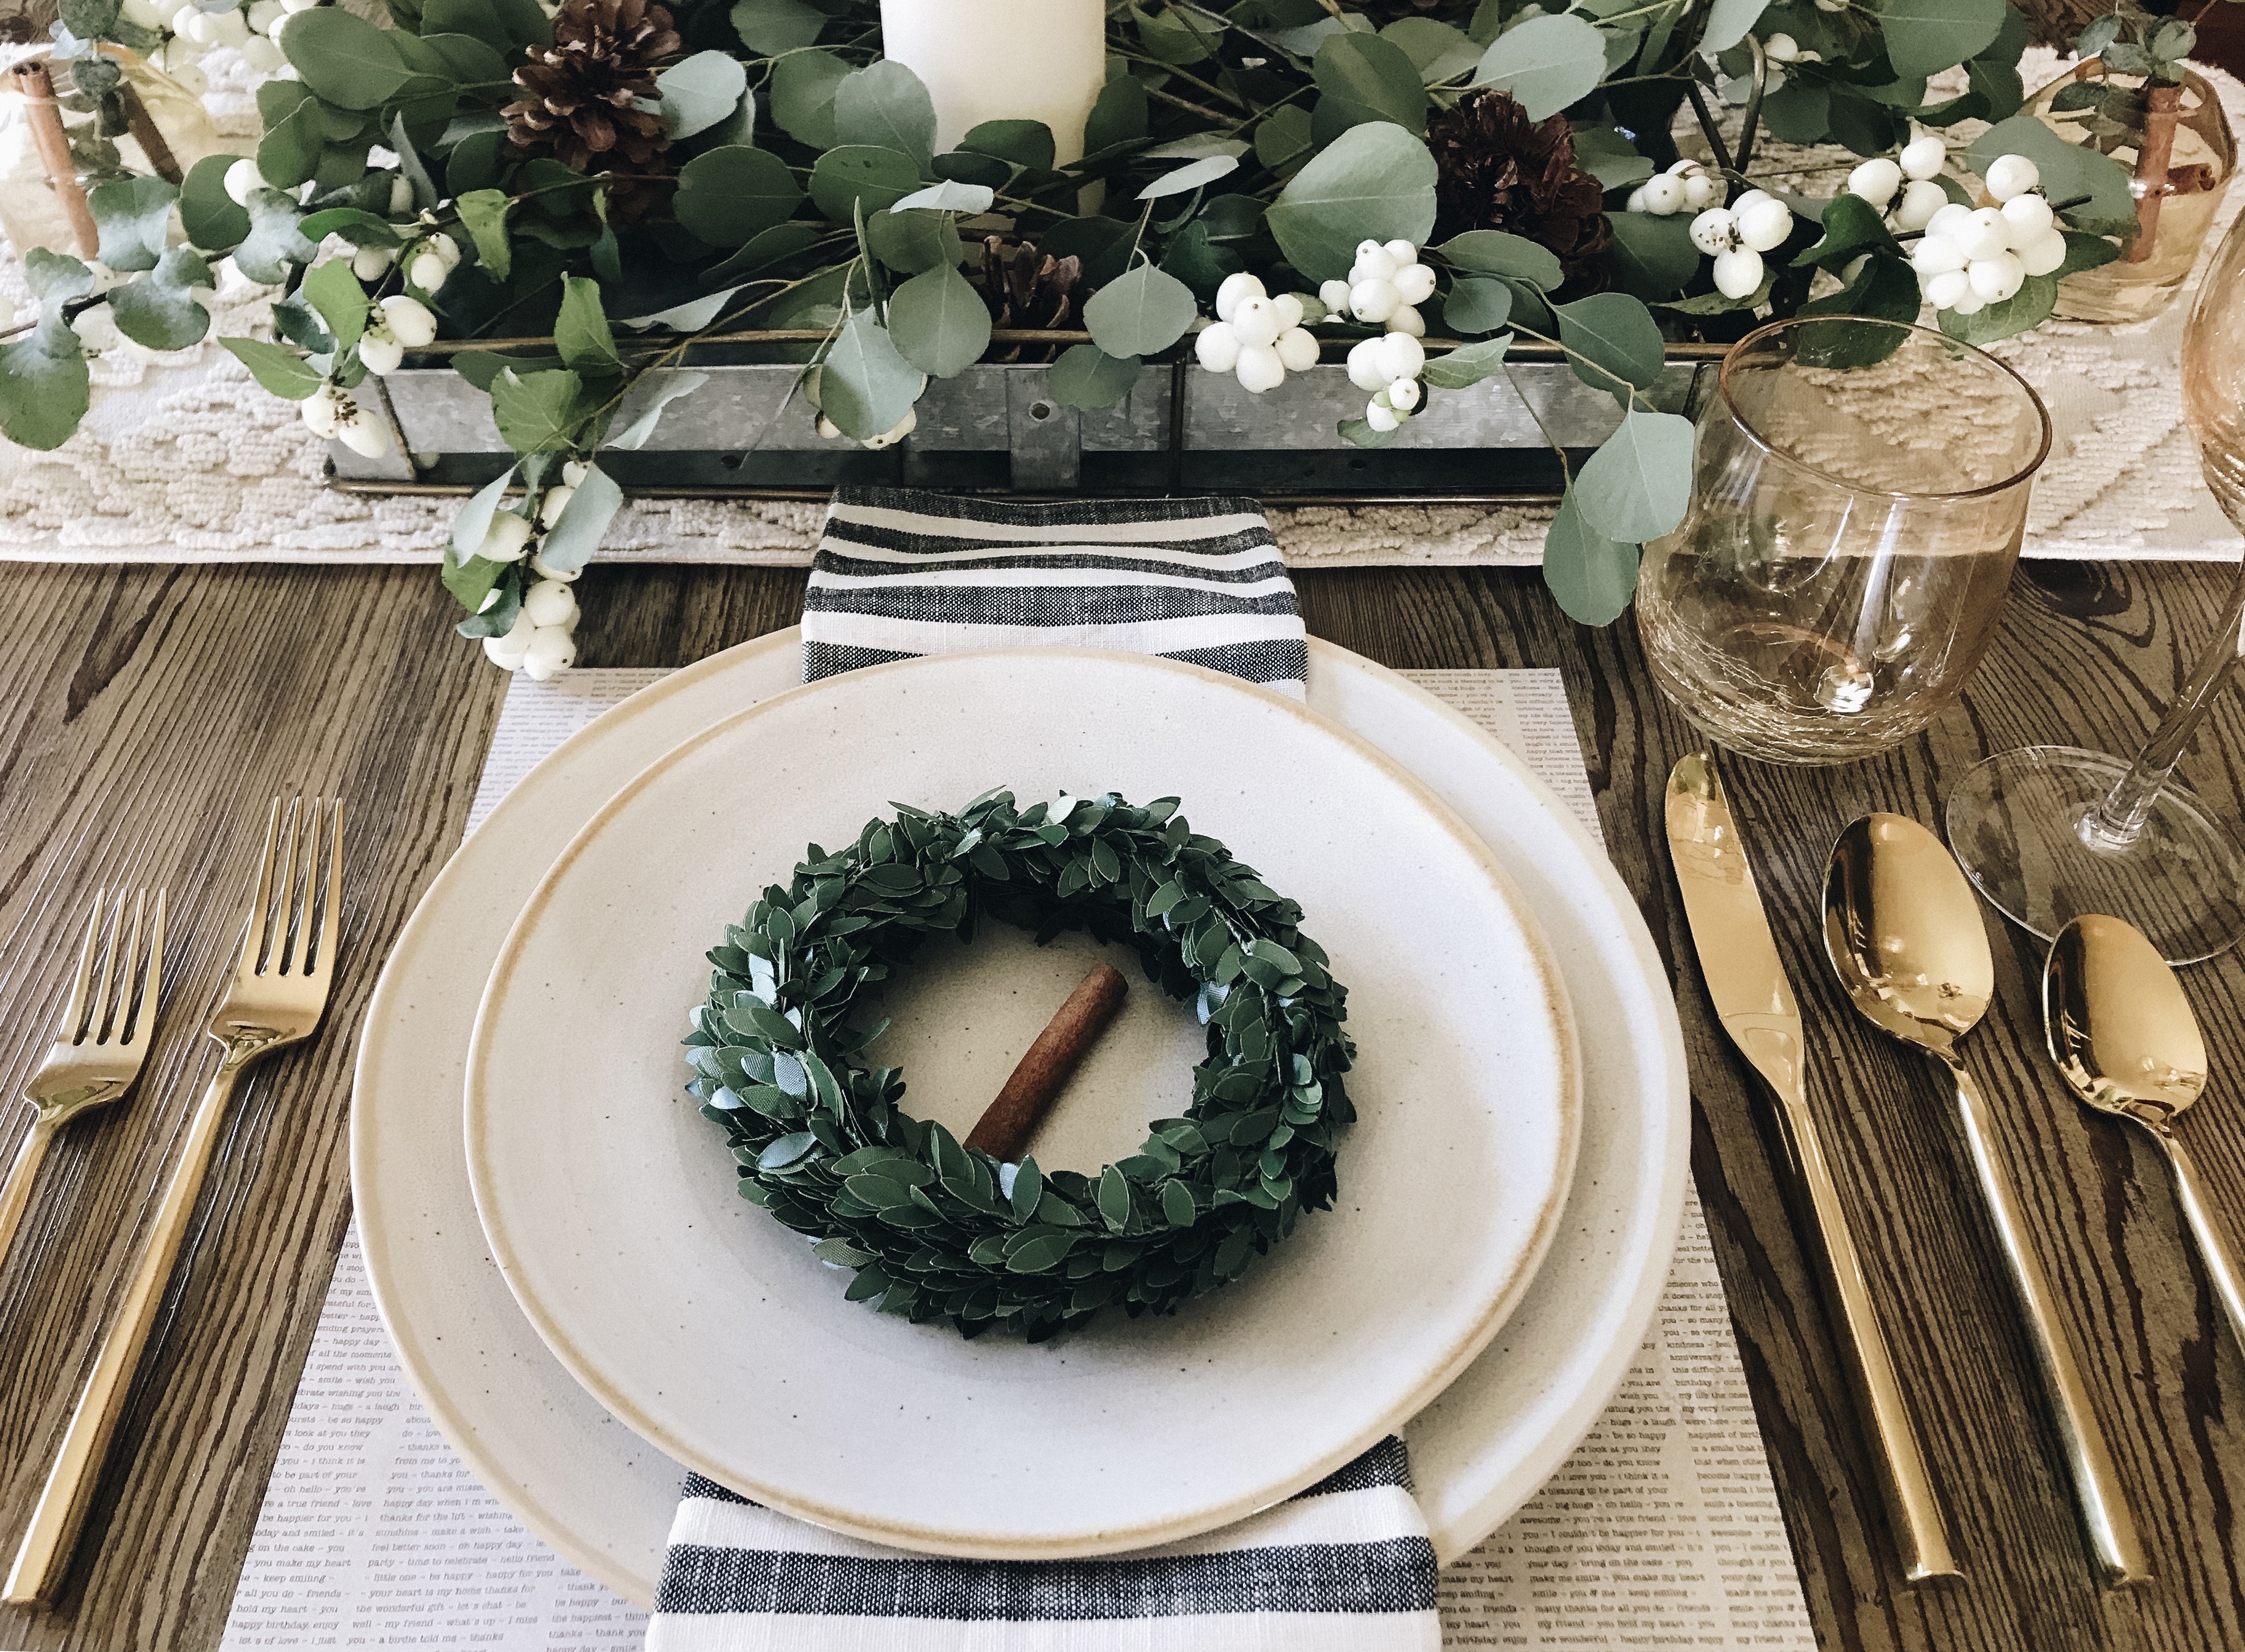 Family, Food and a Great Last Minute Tablescape